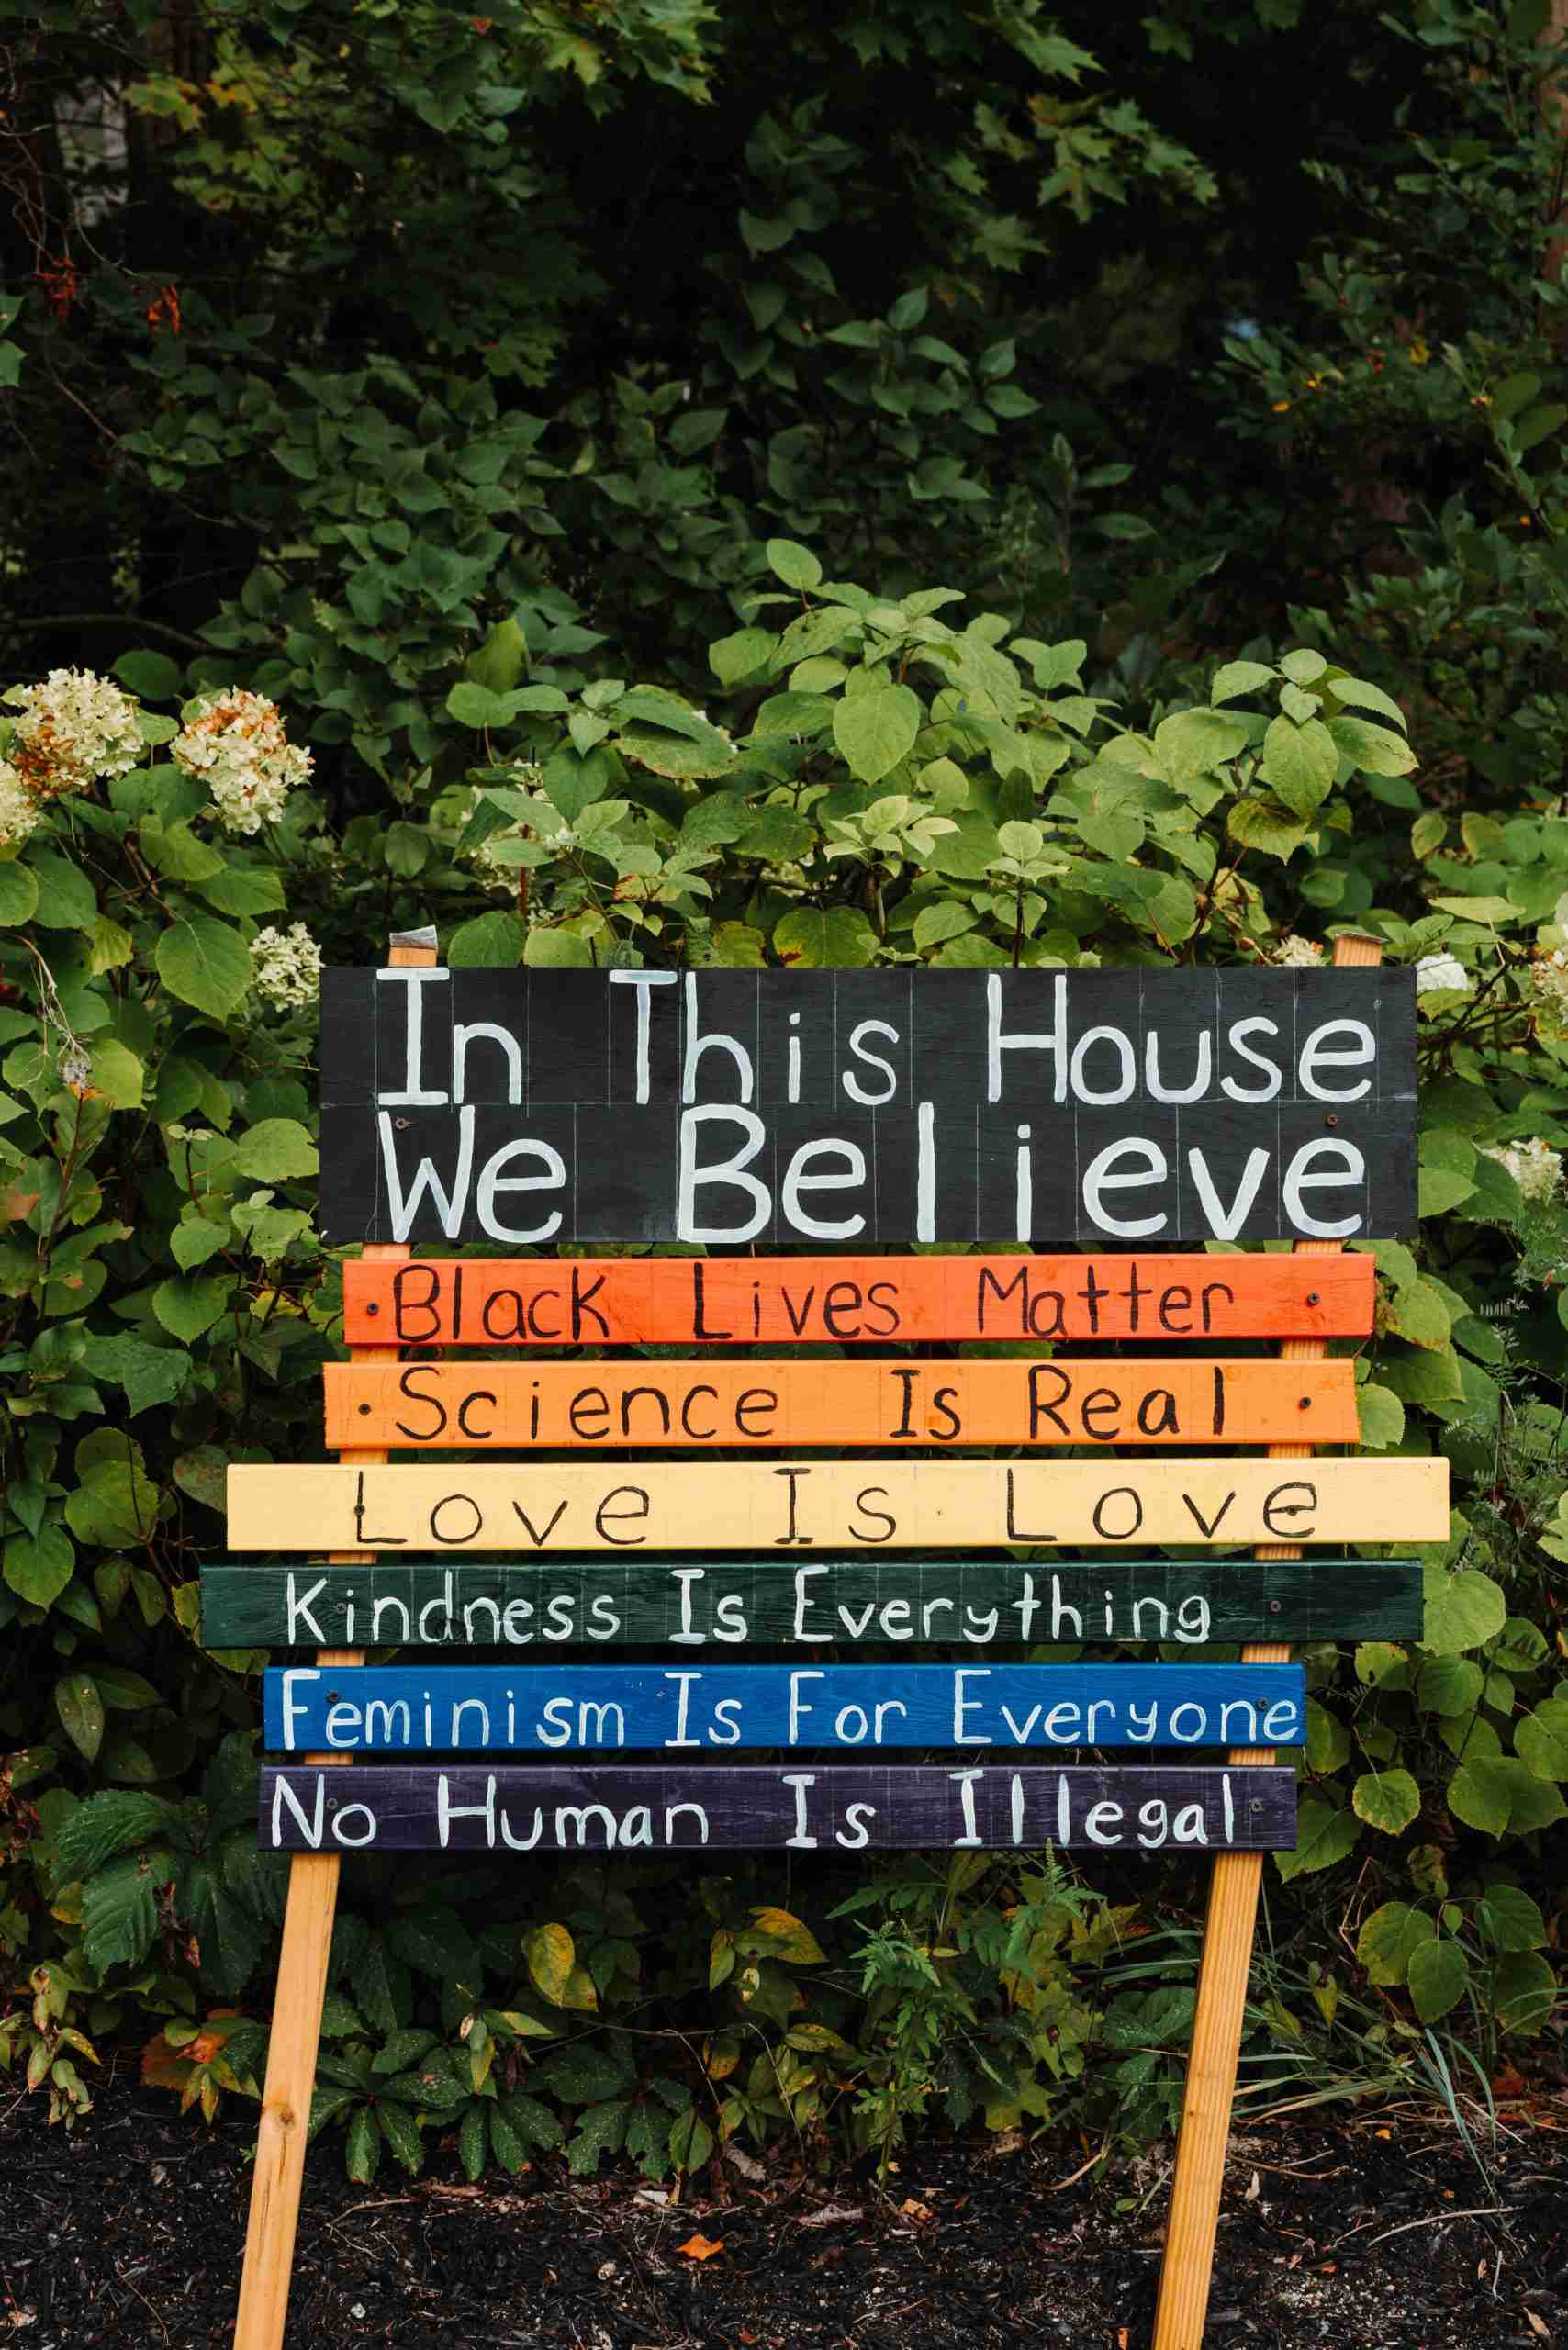 A wooden sign with rainbow colors that says, "In this house we believe, black lives matter, science is real, love is love, kindness is everything, feminism is for everyone, no human is illegal"